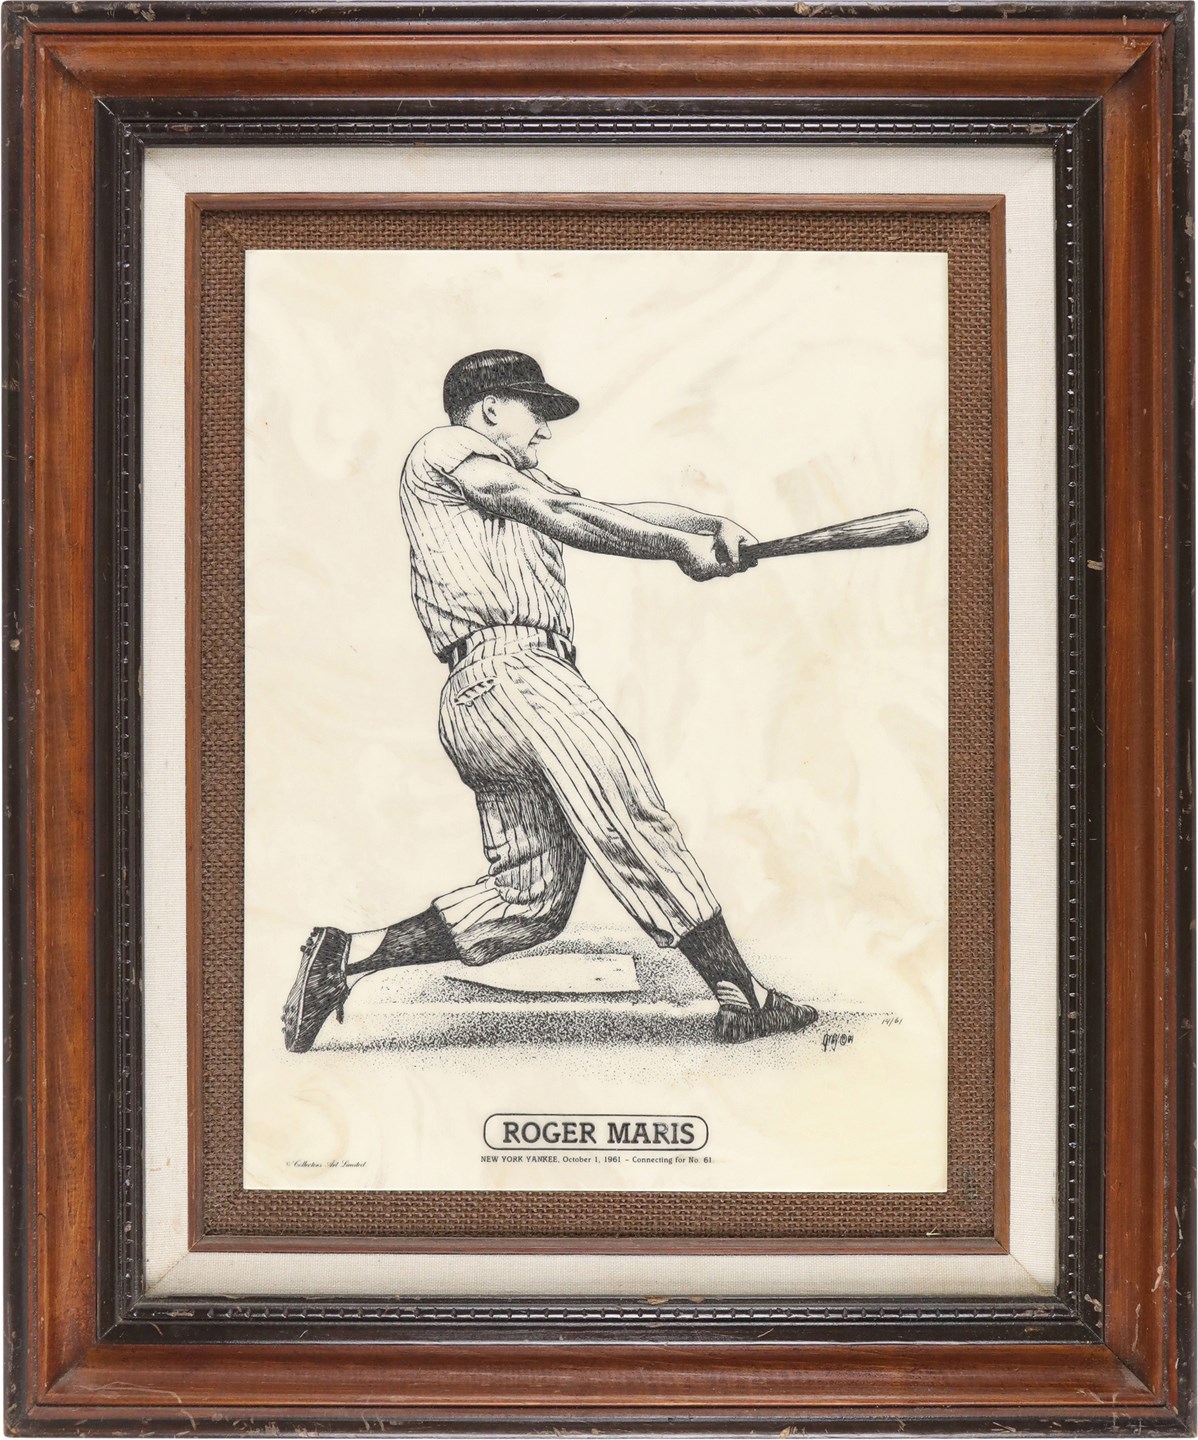 - Roger Maris "61 Home Runs" Marble Etching #14/61 with Signed Roger Maris LOA (PSA)